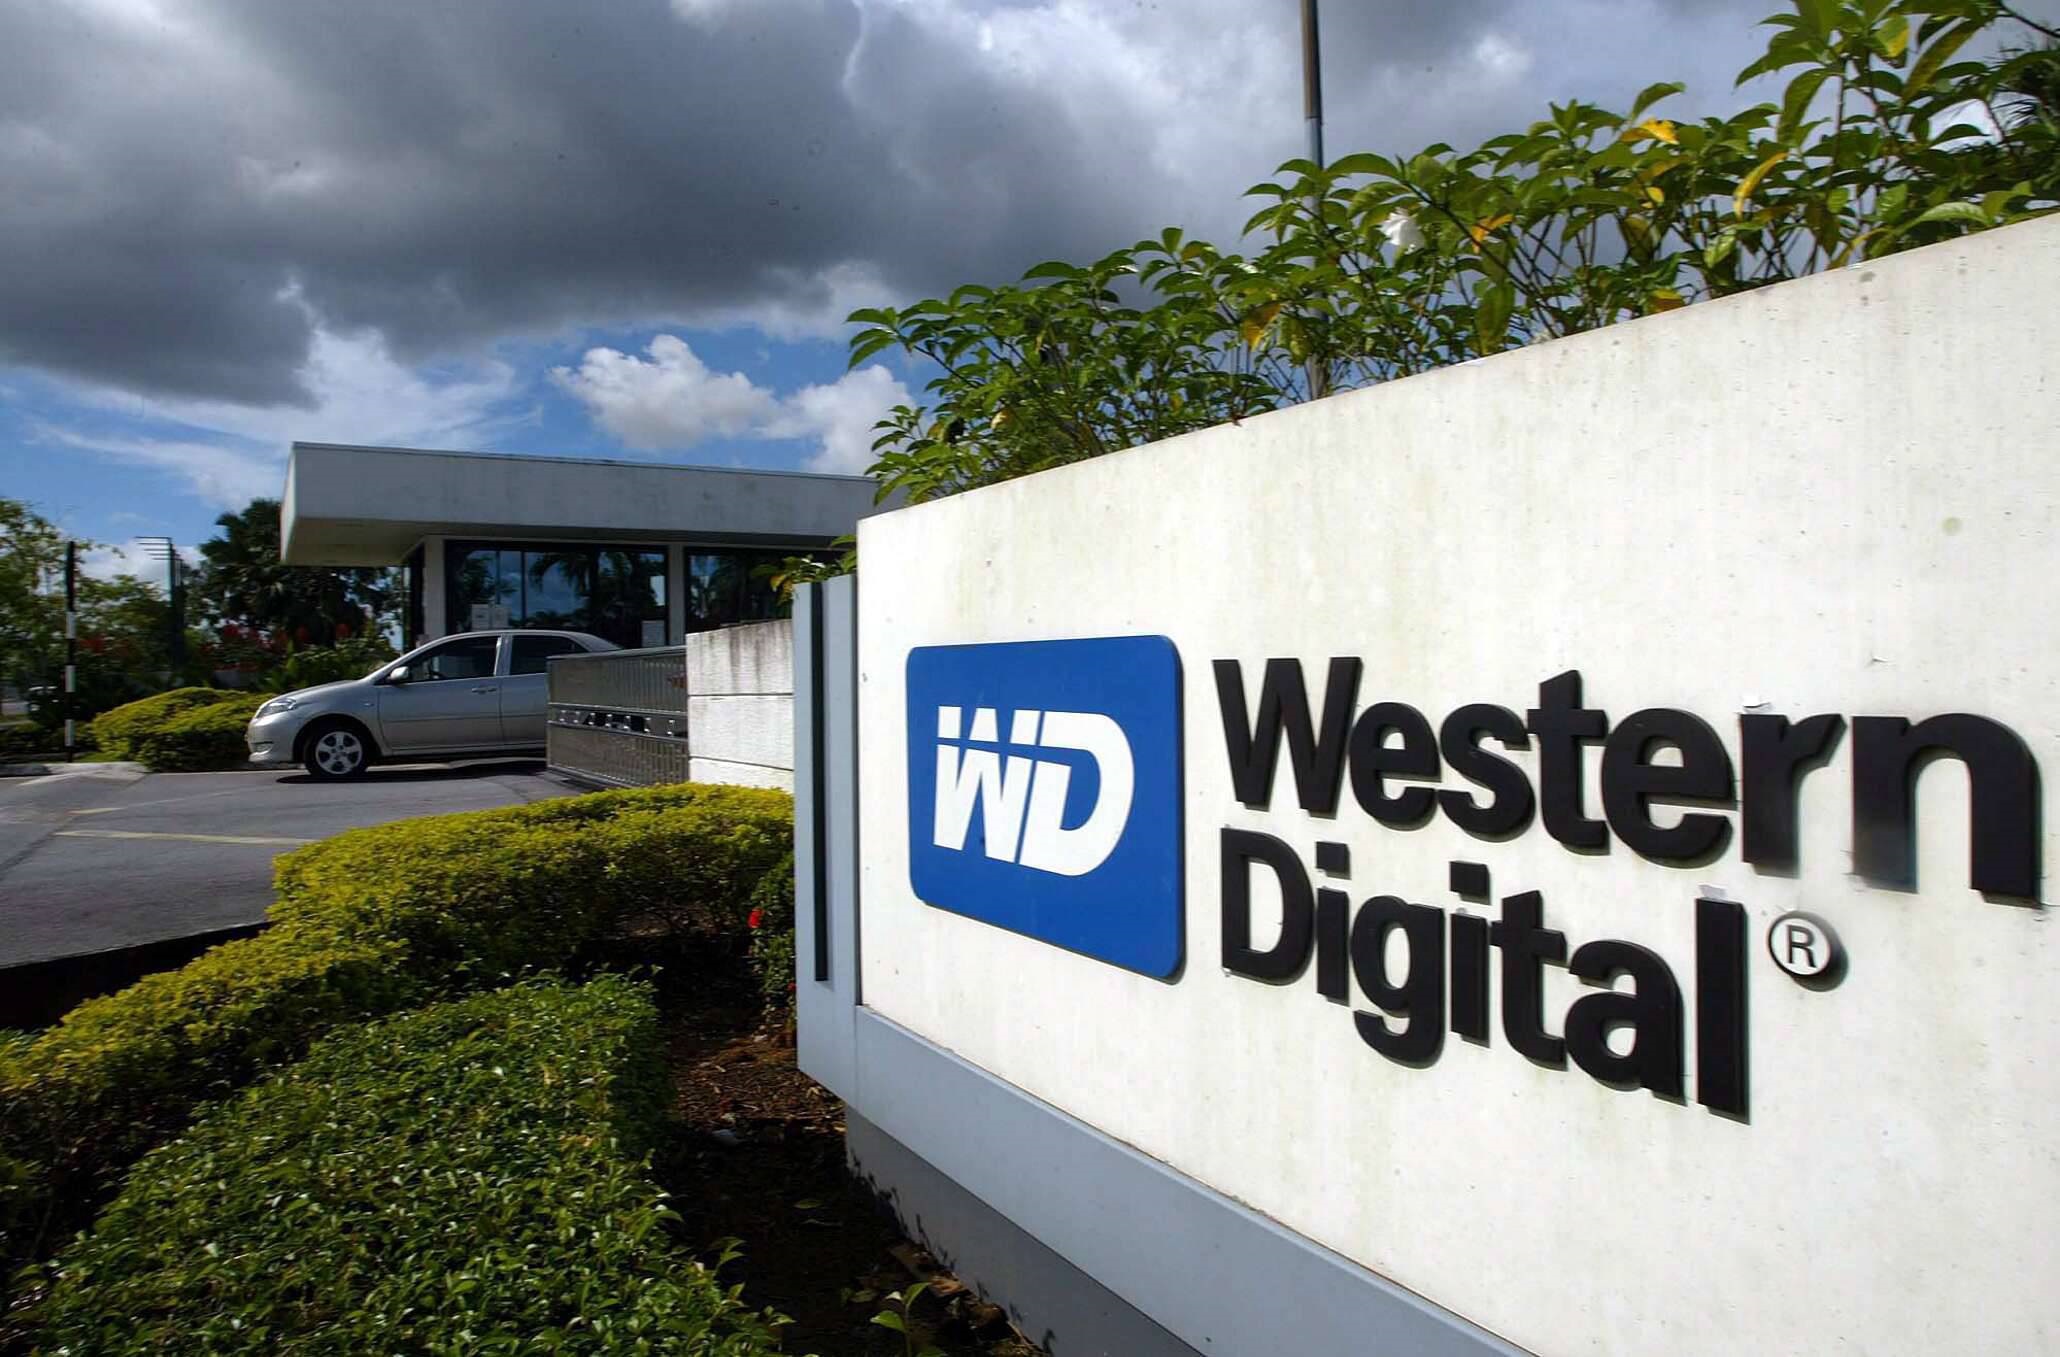 Western Digital (WDC): First quarter 2022 earnings released: EPS US$1.97 (vs US$0.20 loss in 1Q 2021)